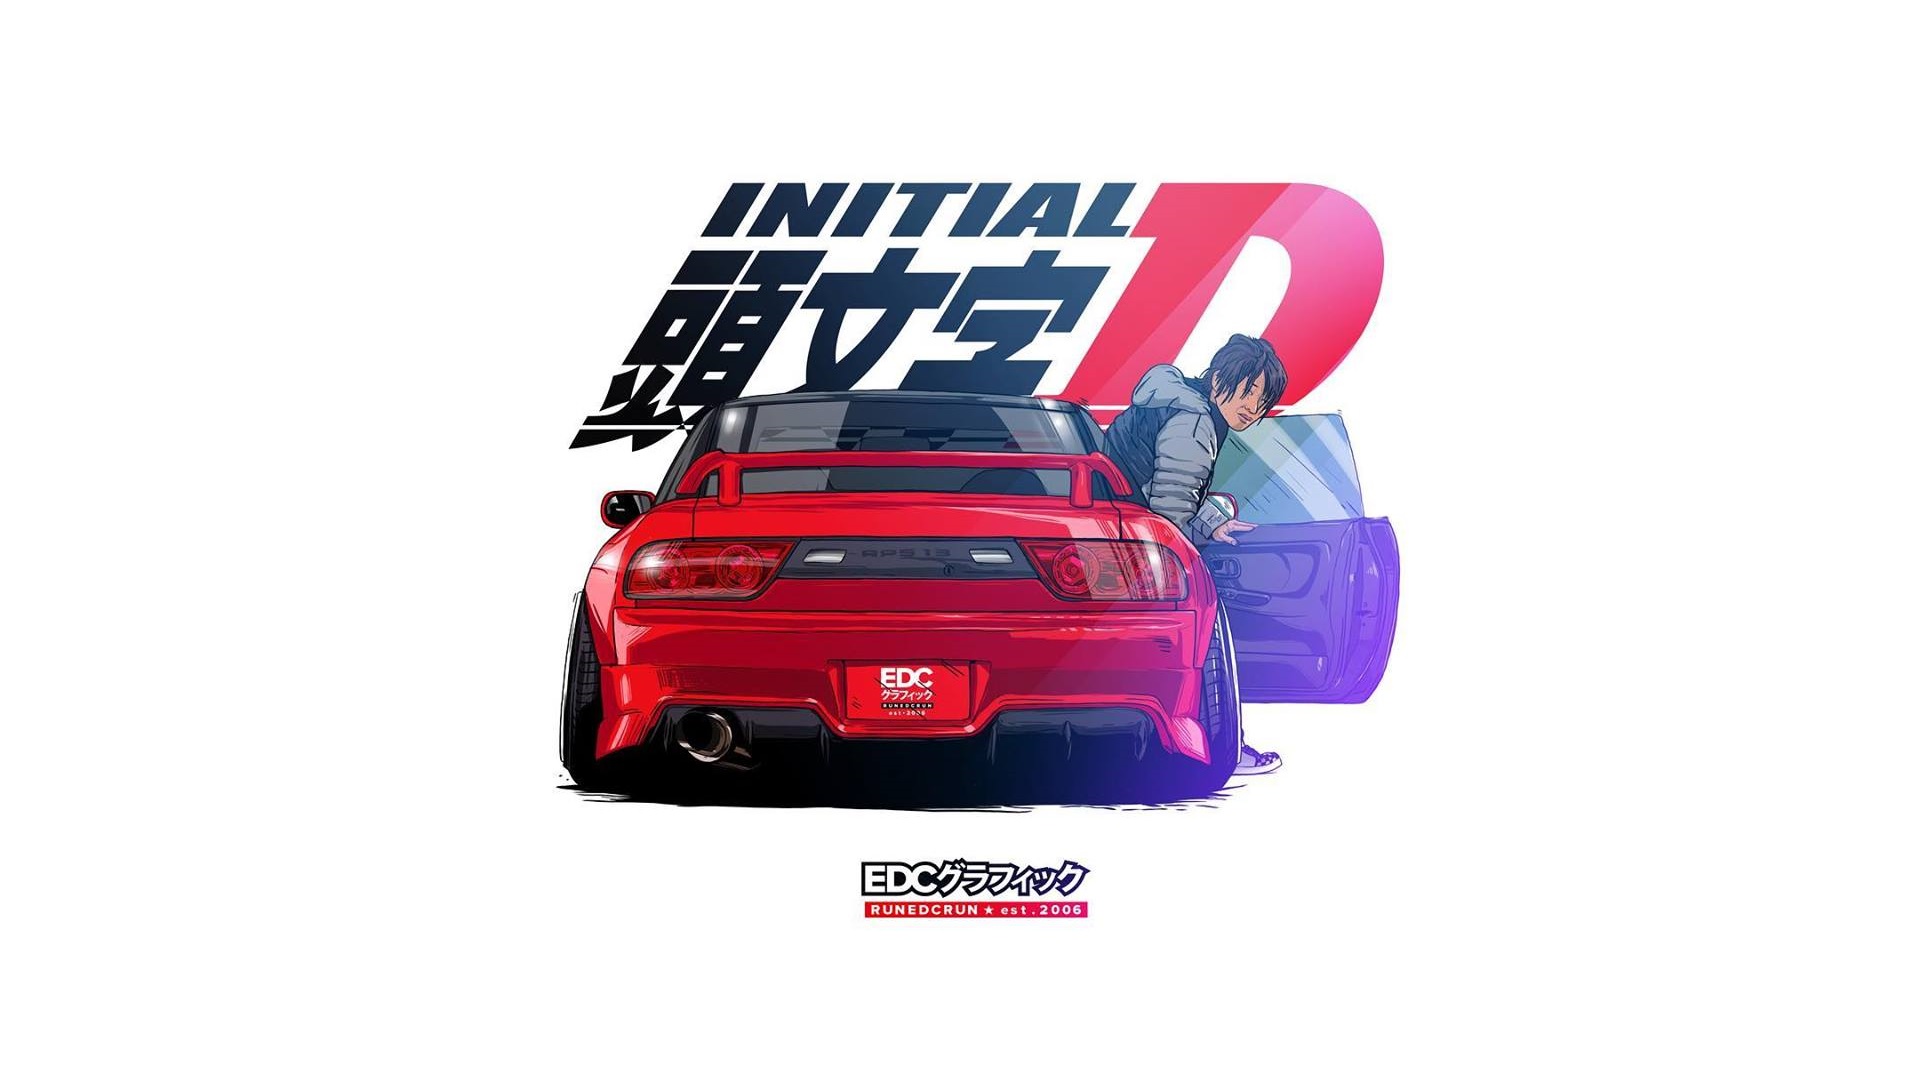 General 1920x1080 EDC Graphics Nissan 240SX Nissan CGI Initial D anime Japanese cars rear view red cars simple background white background car vehicle anime men 2006 (Year)